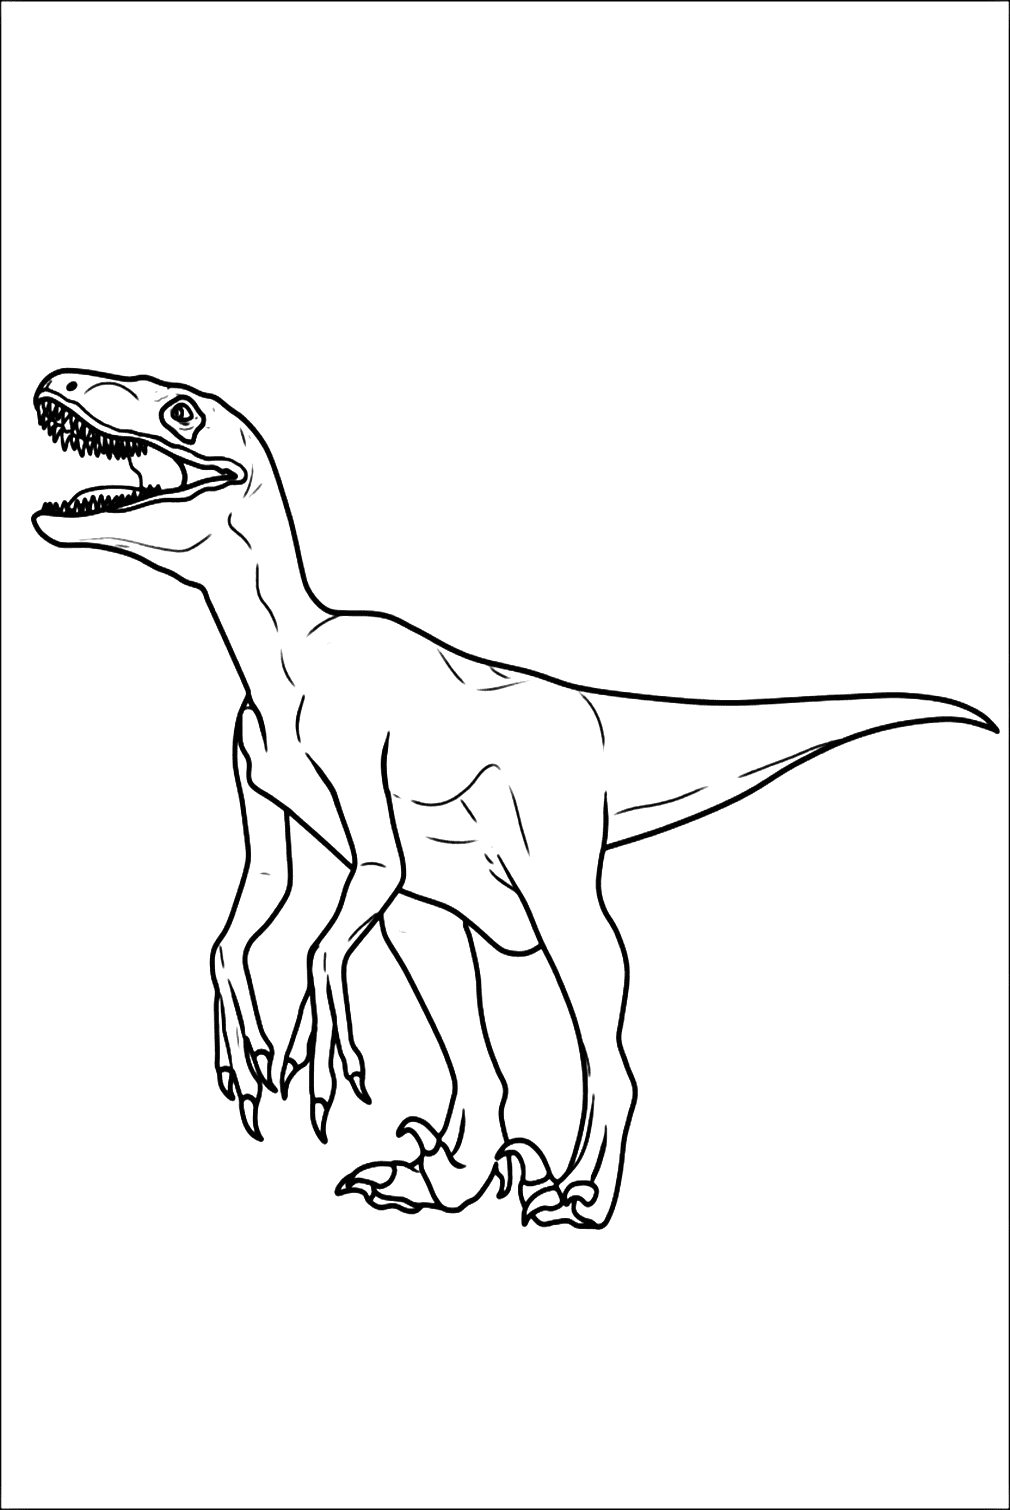 Jurassic World Coloring Coloring Page